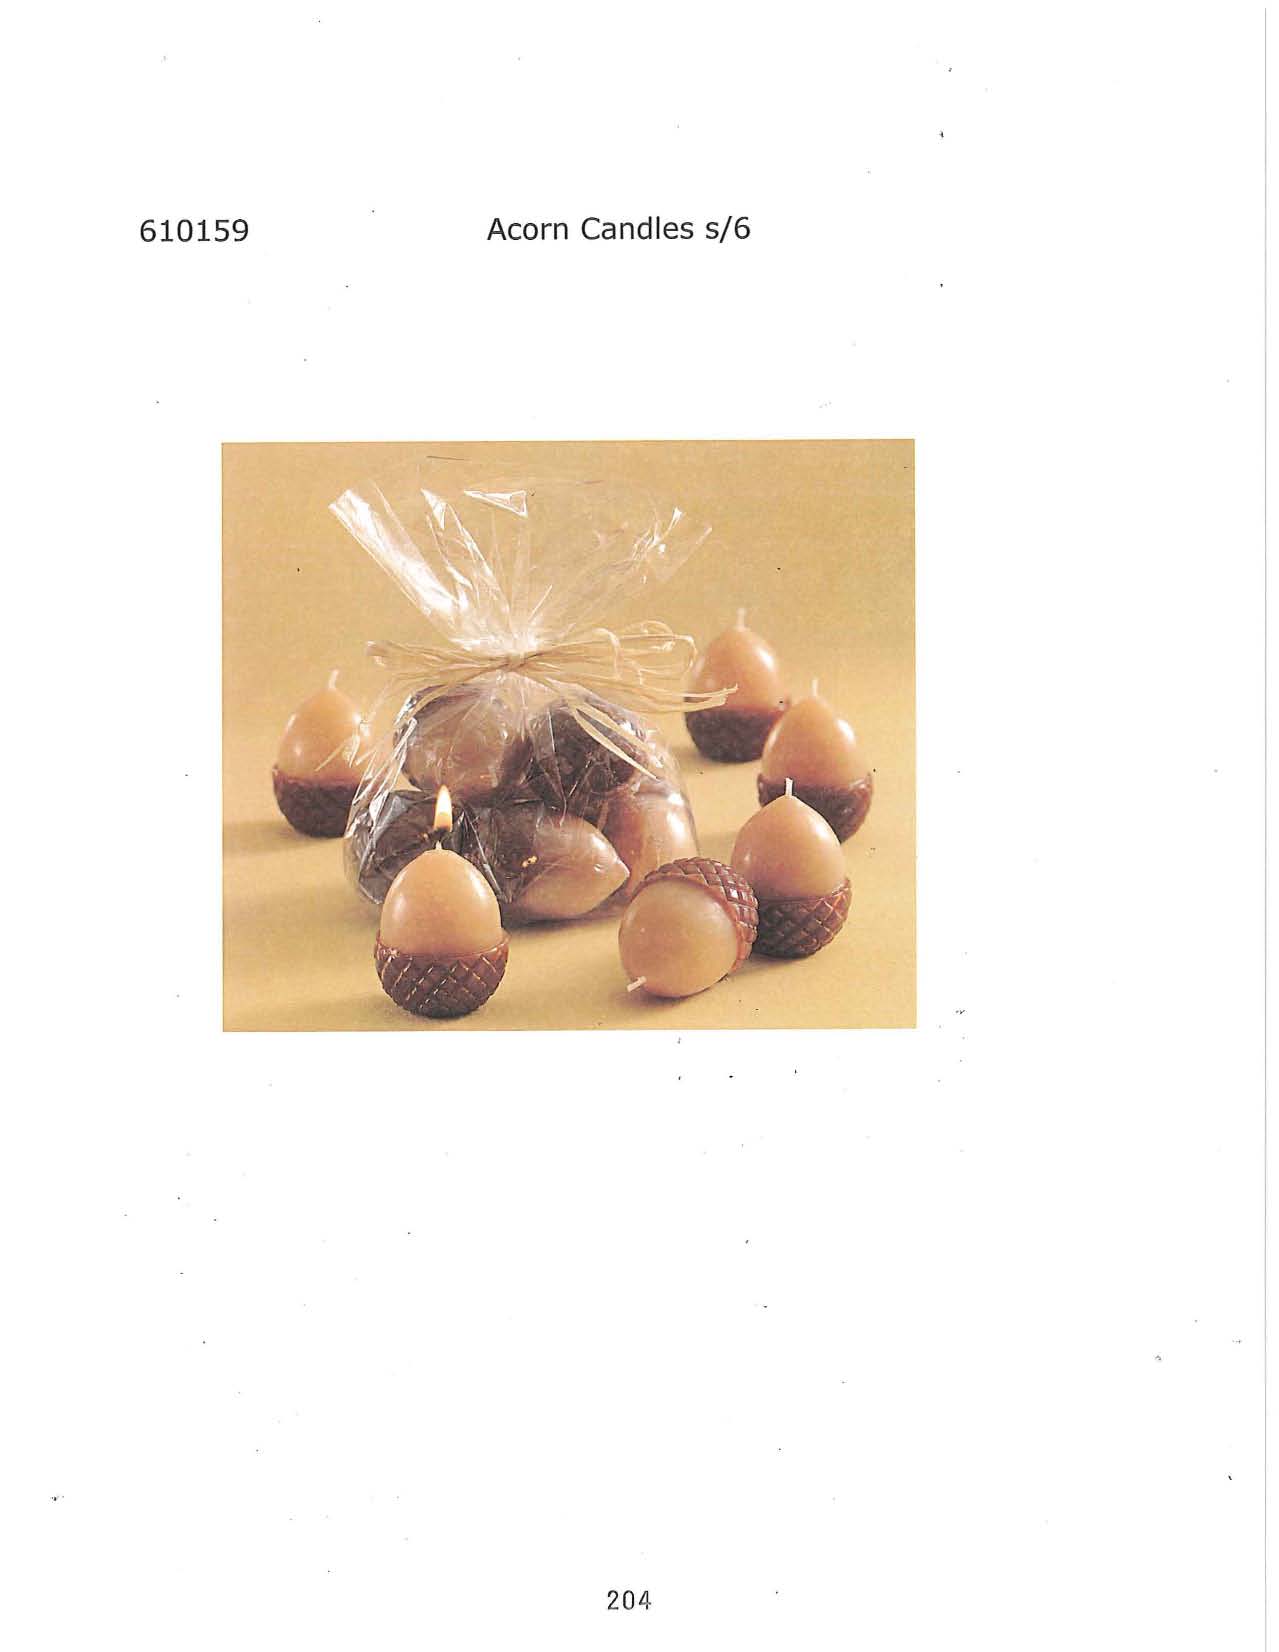 Acorn Candle s/6